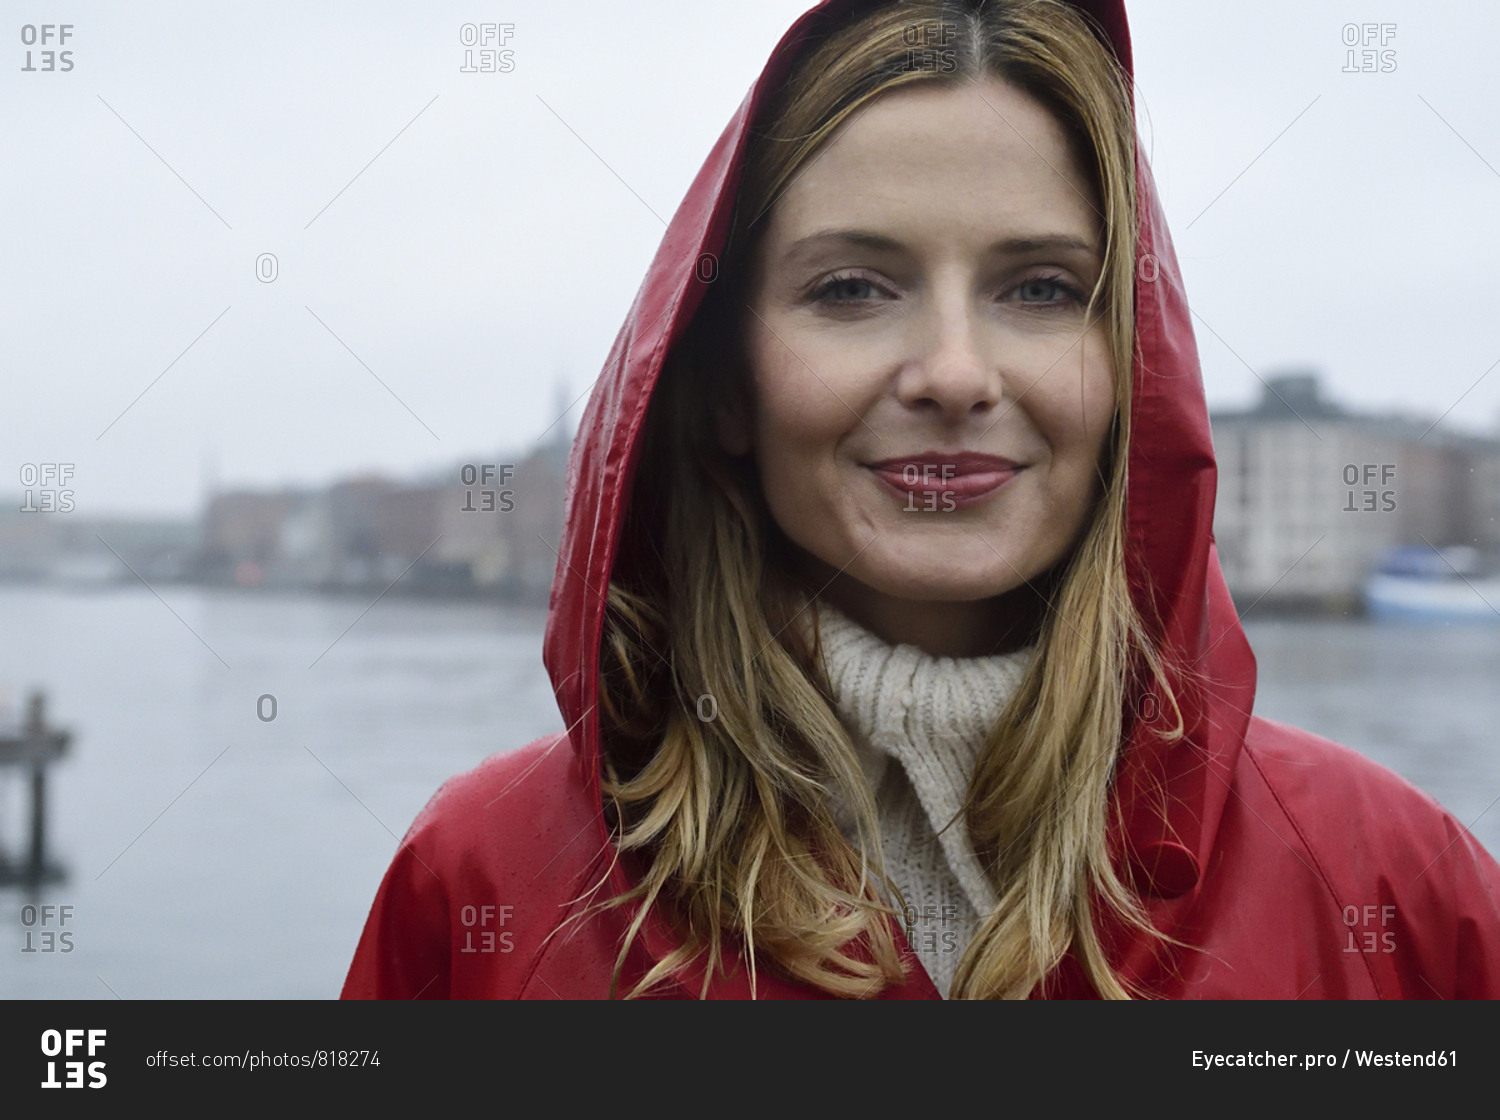 Denmark- Copenhagen- portrait of smiling woman at the waterfront in rainy weather